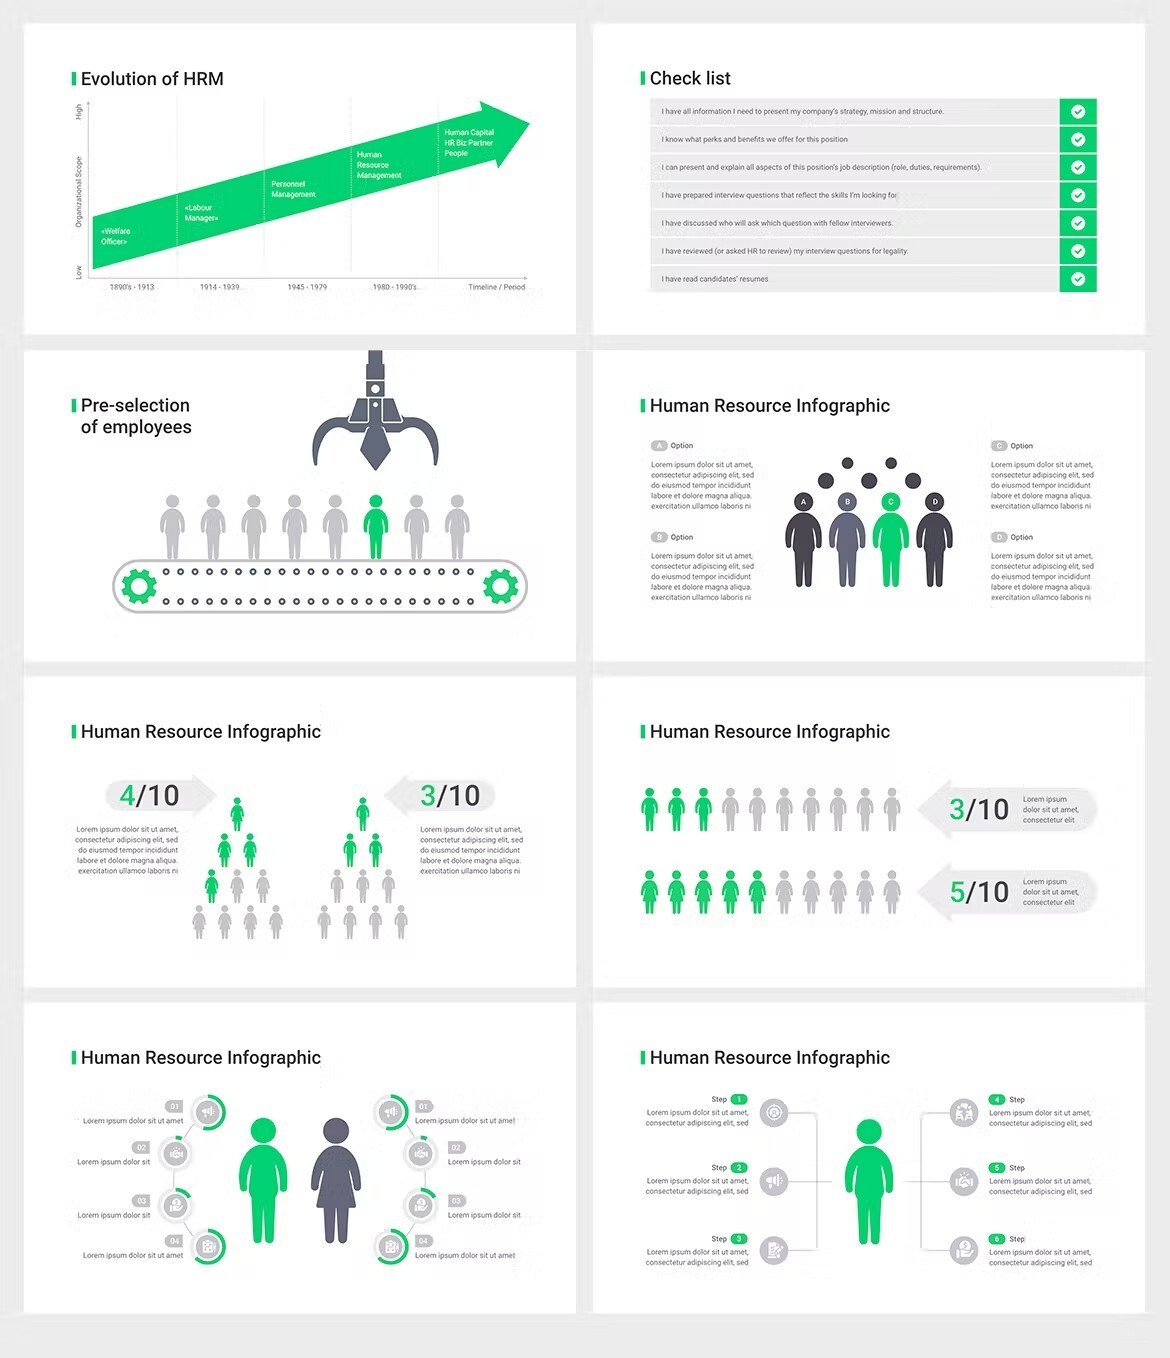 So many green infographic elements.